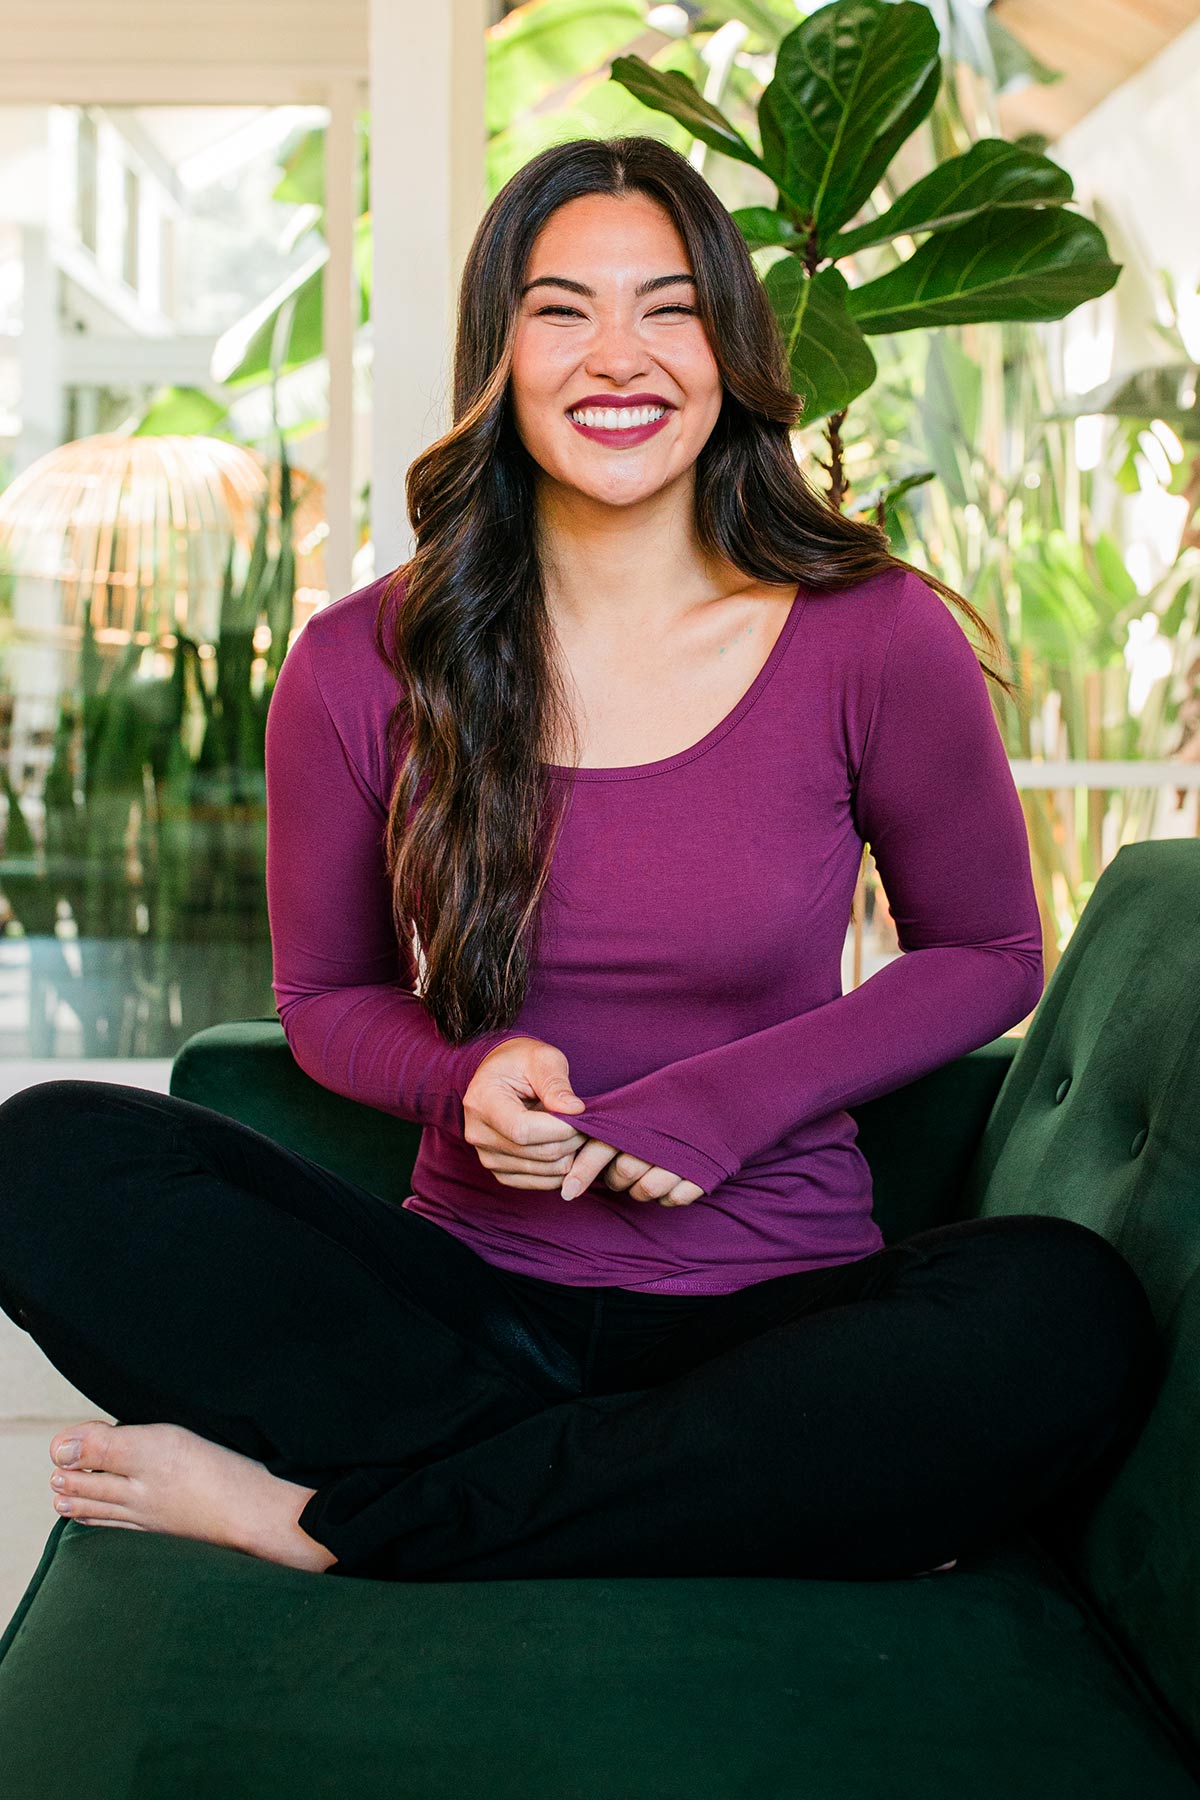 A woman sitting on a couch with her legs crossed, a smile on her face, wearing Yala Avril Scoop Neck Long Sleeve Bamboo Top in Boysenberry